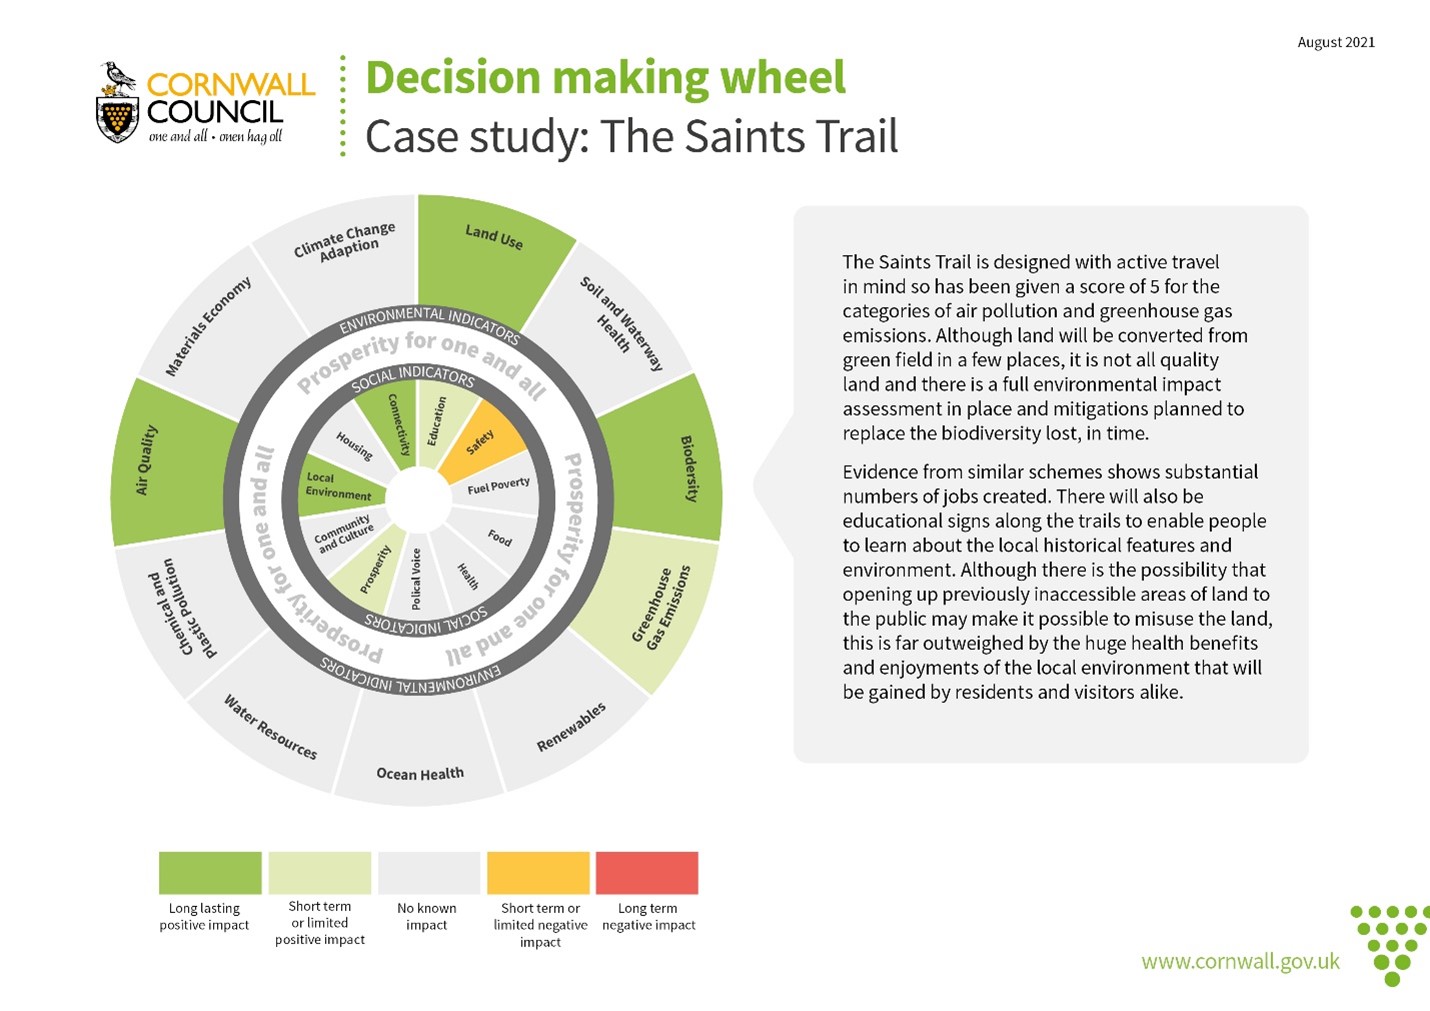 An example of Cornwall Councils decision making wheel in action